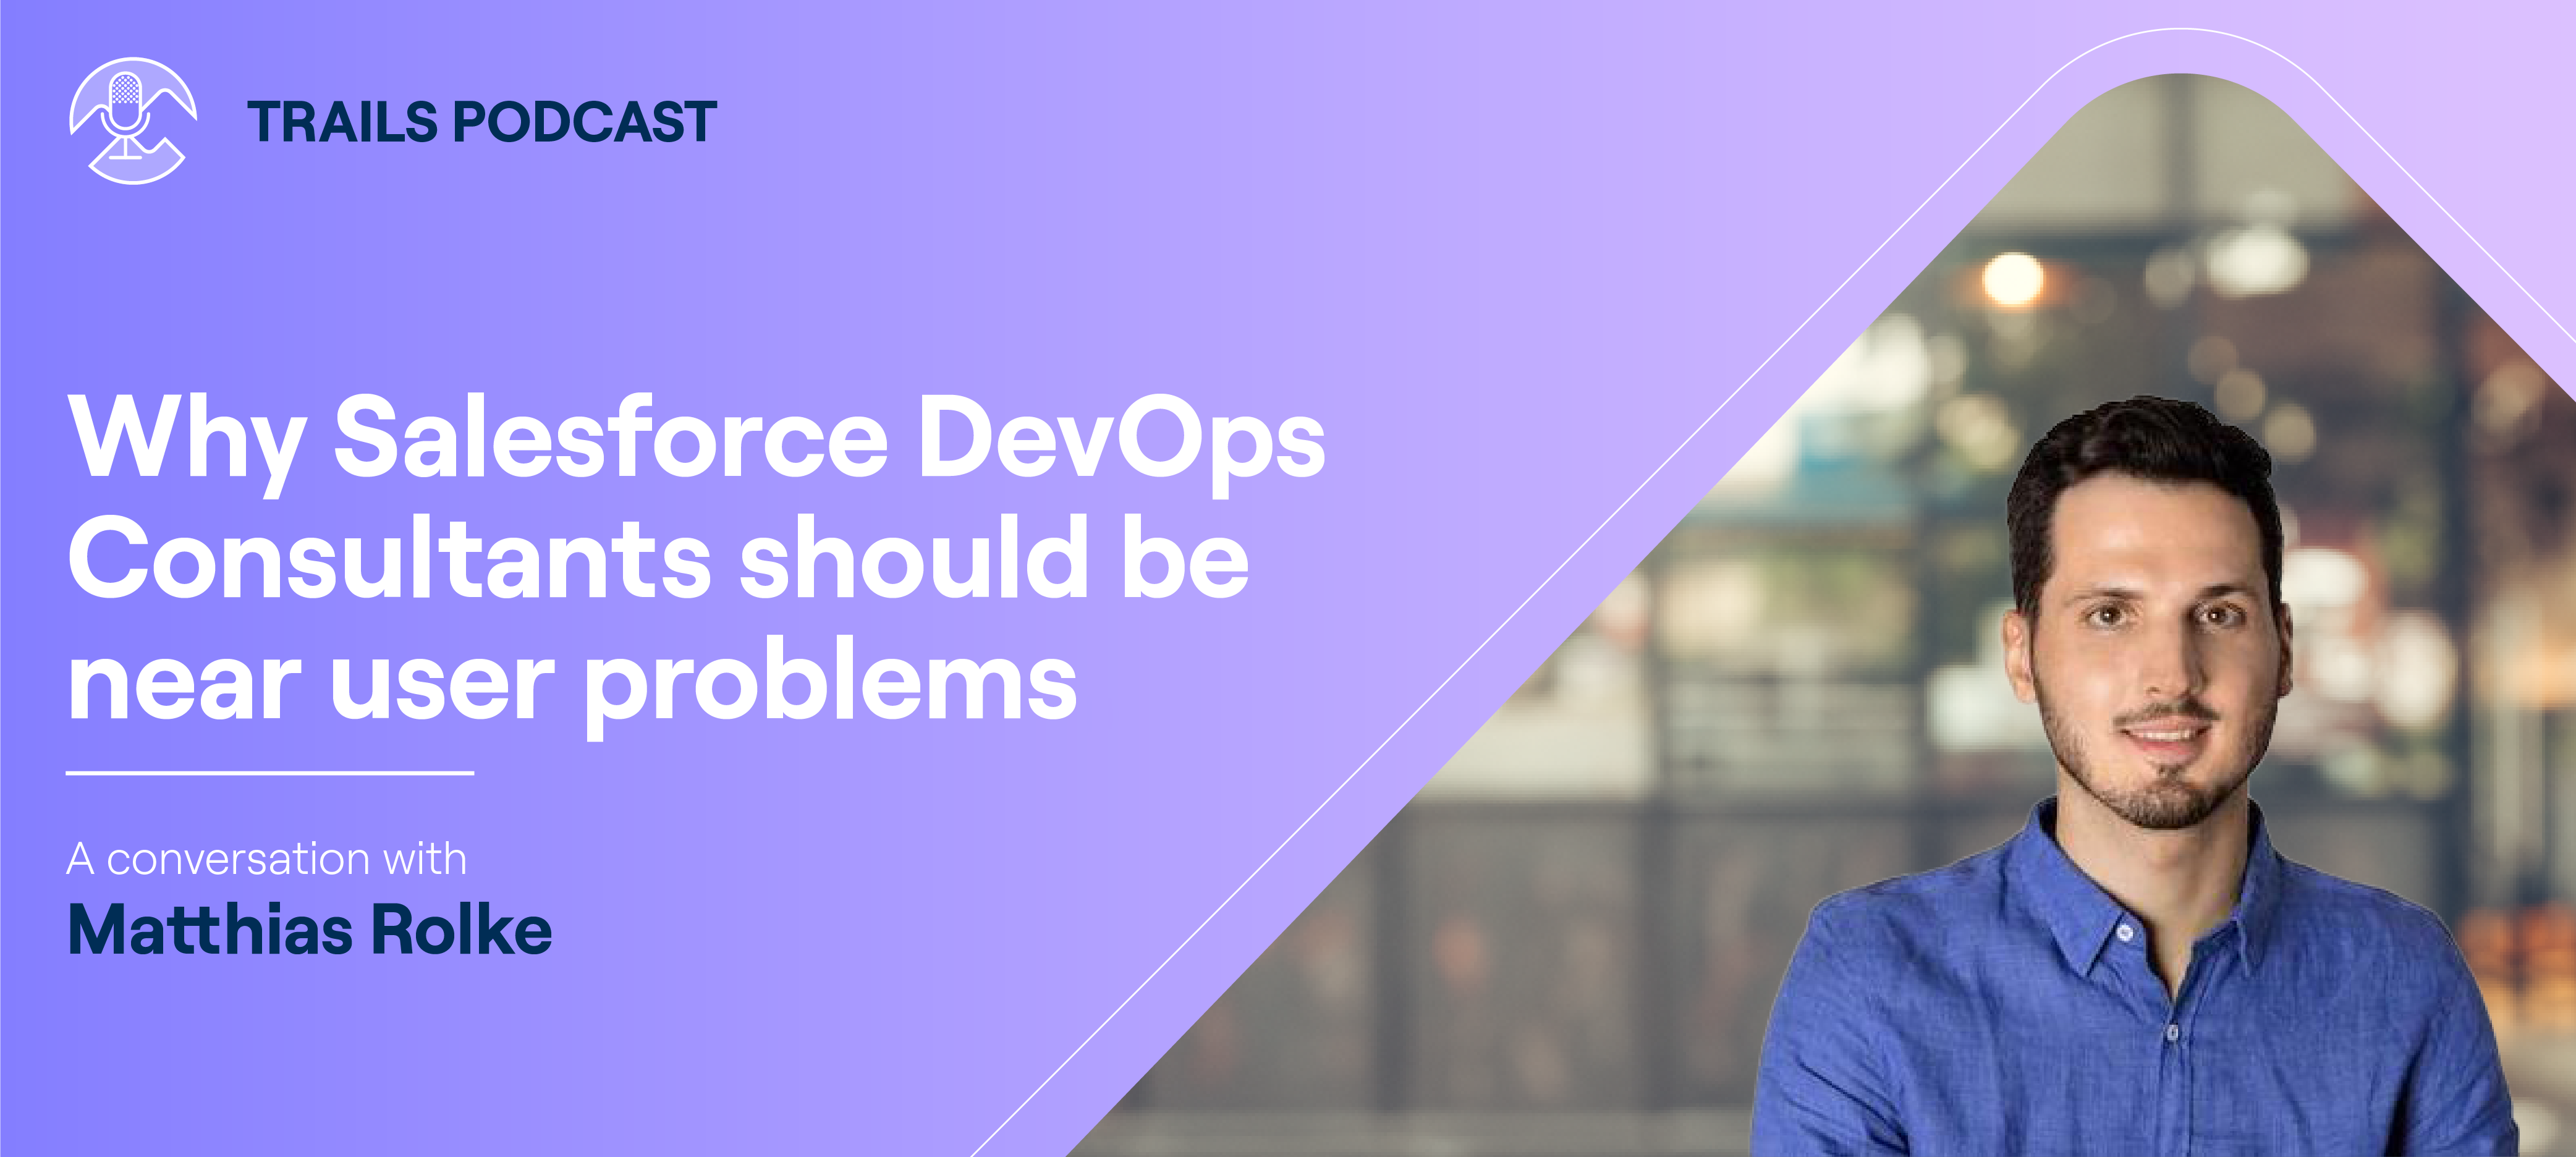 Why Salesforce DevOps Consultants should be near user problems (Trails Podcast episode #16 with Matthias Rolke)